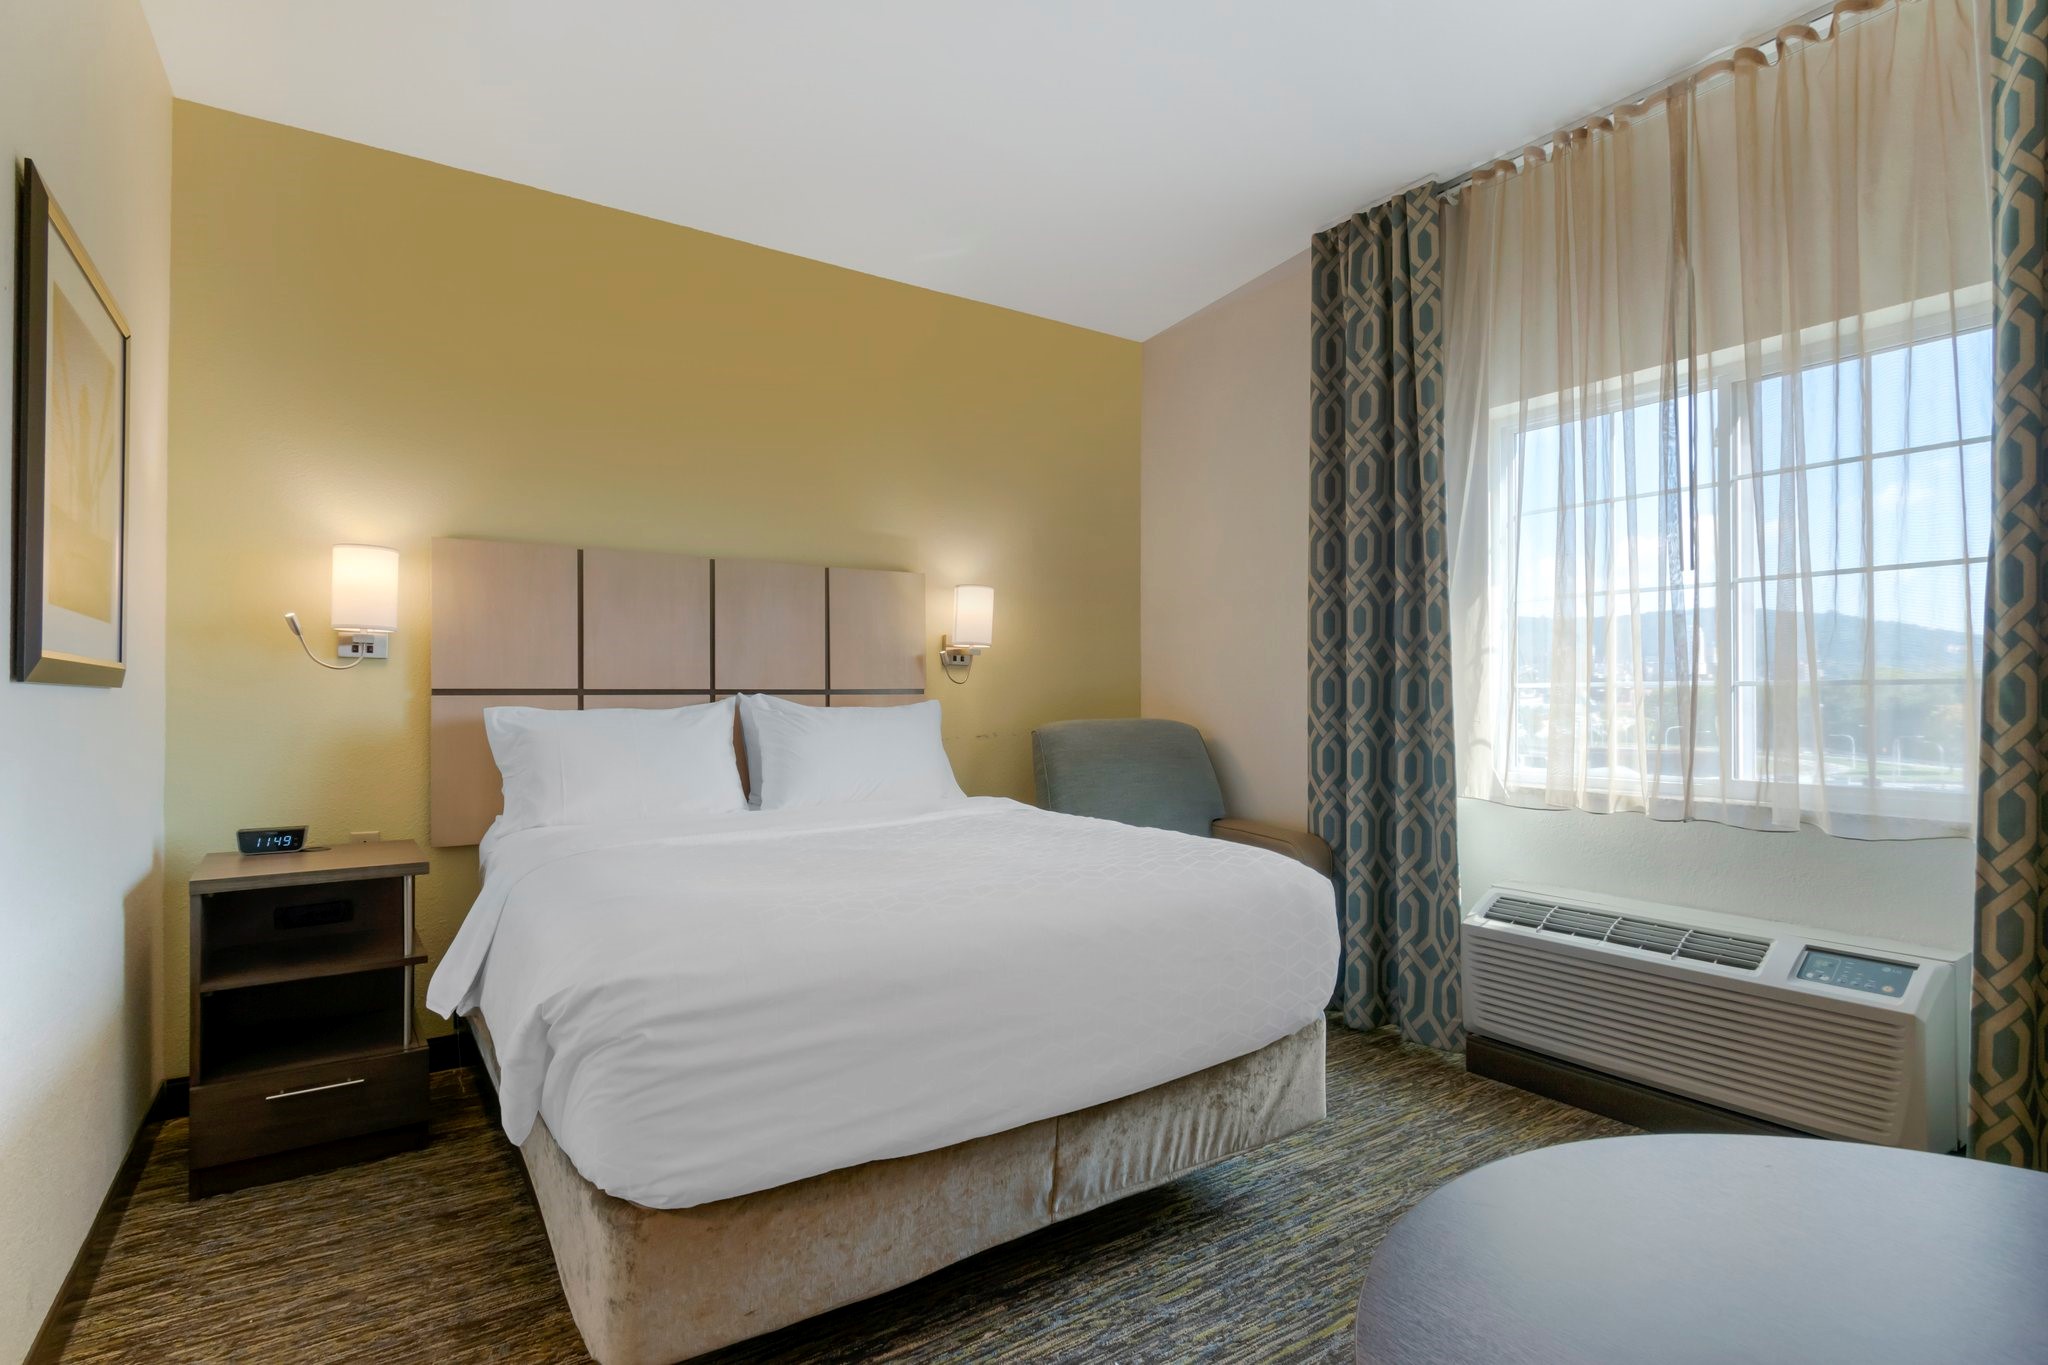 Meeting Rooms at Candlewood Suites READING, 55 SOUTH 3RD AVENUE